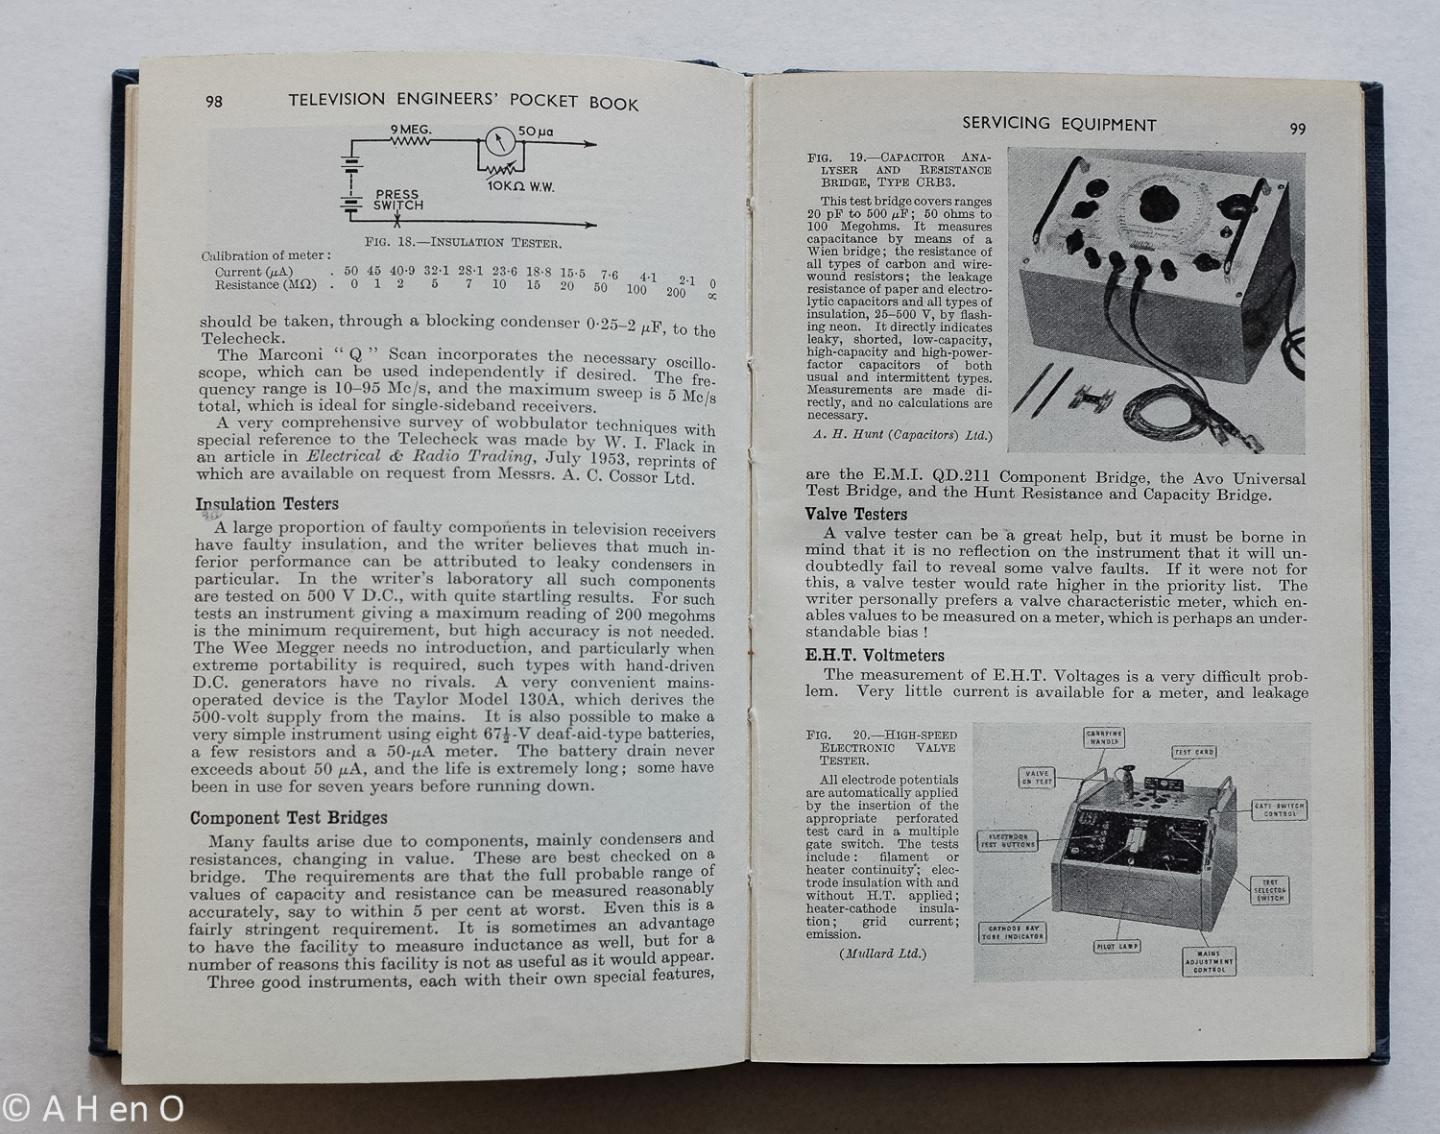 Molloy, Edward. - Television engineers' pocket book  - a compendium of useful data for television engineers, dealers and servicemen.